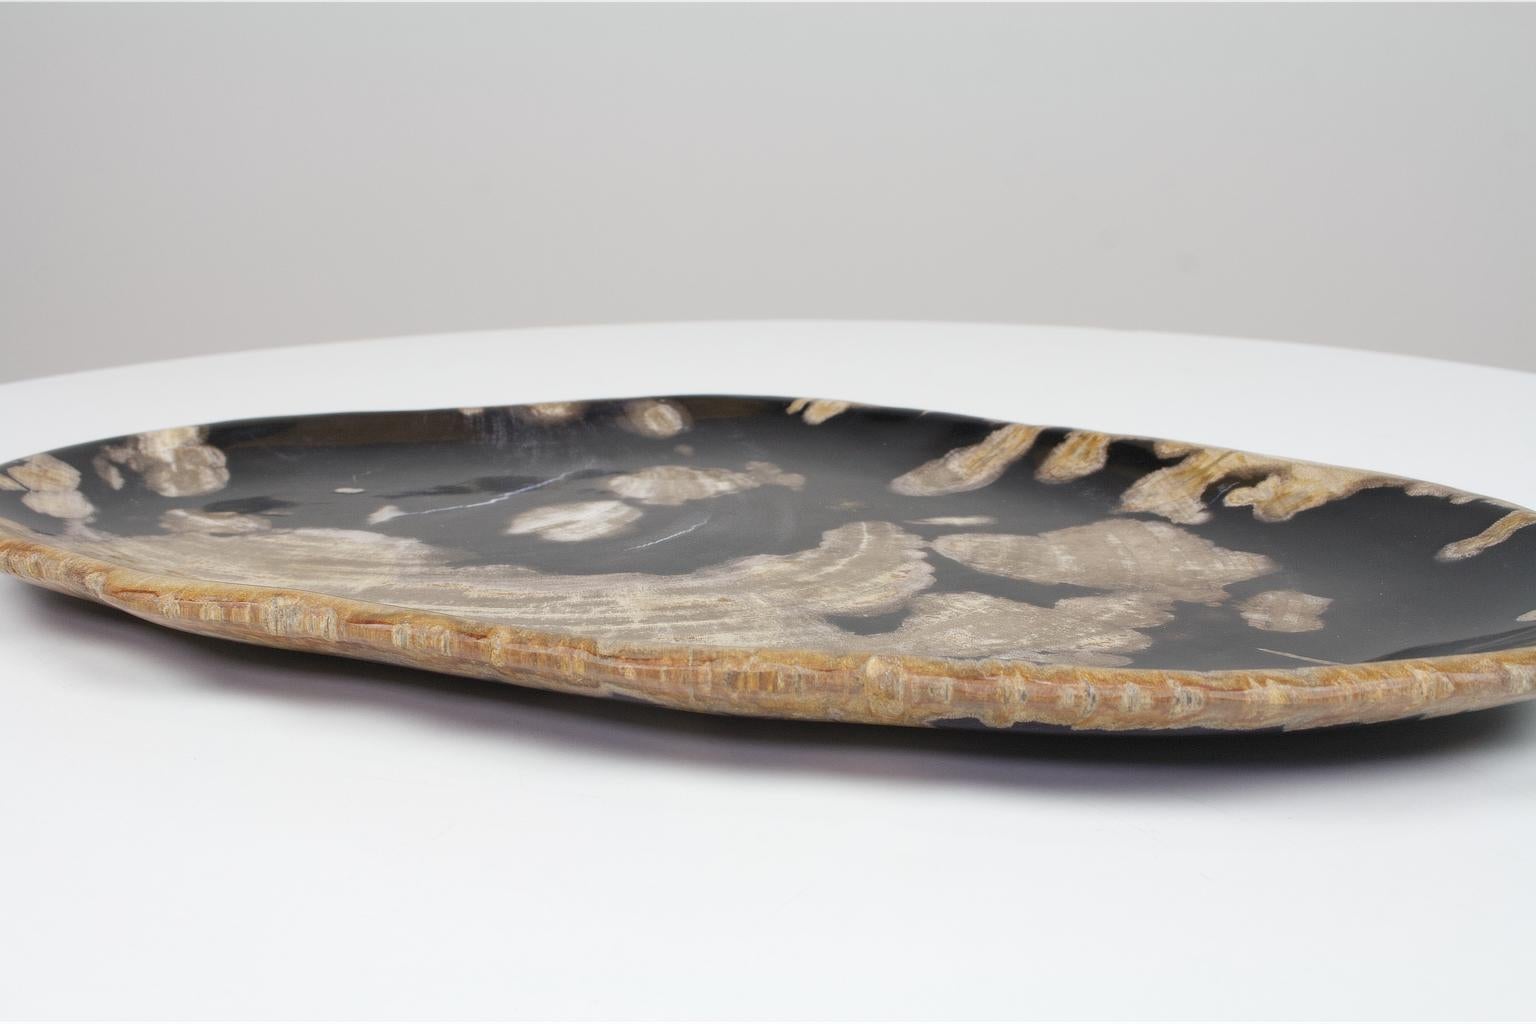 Indonesian Black and Beige Oval Shaped Petrified Wooden Platter or Plate Organic Origin